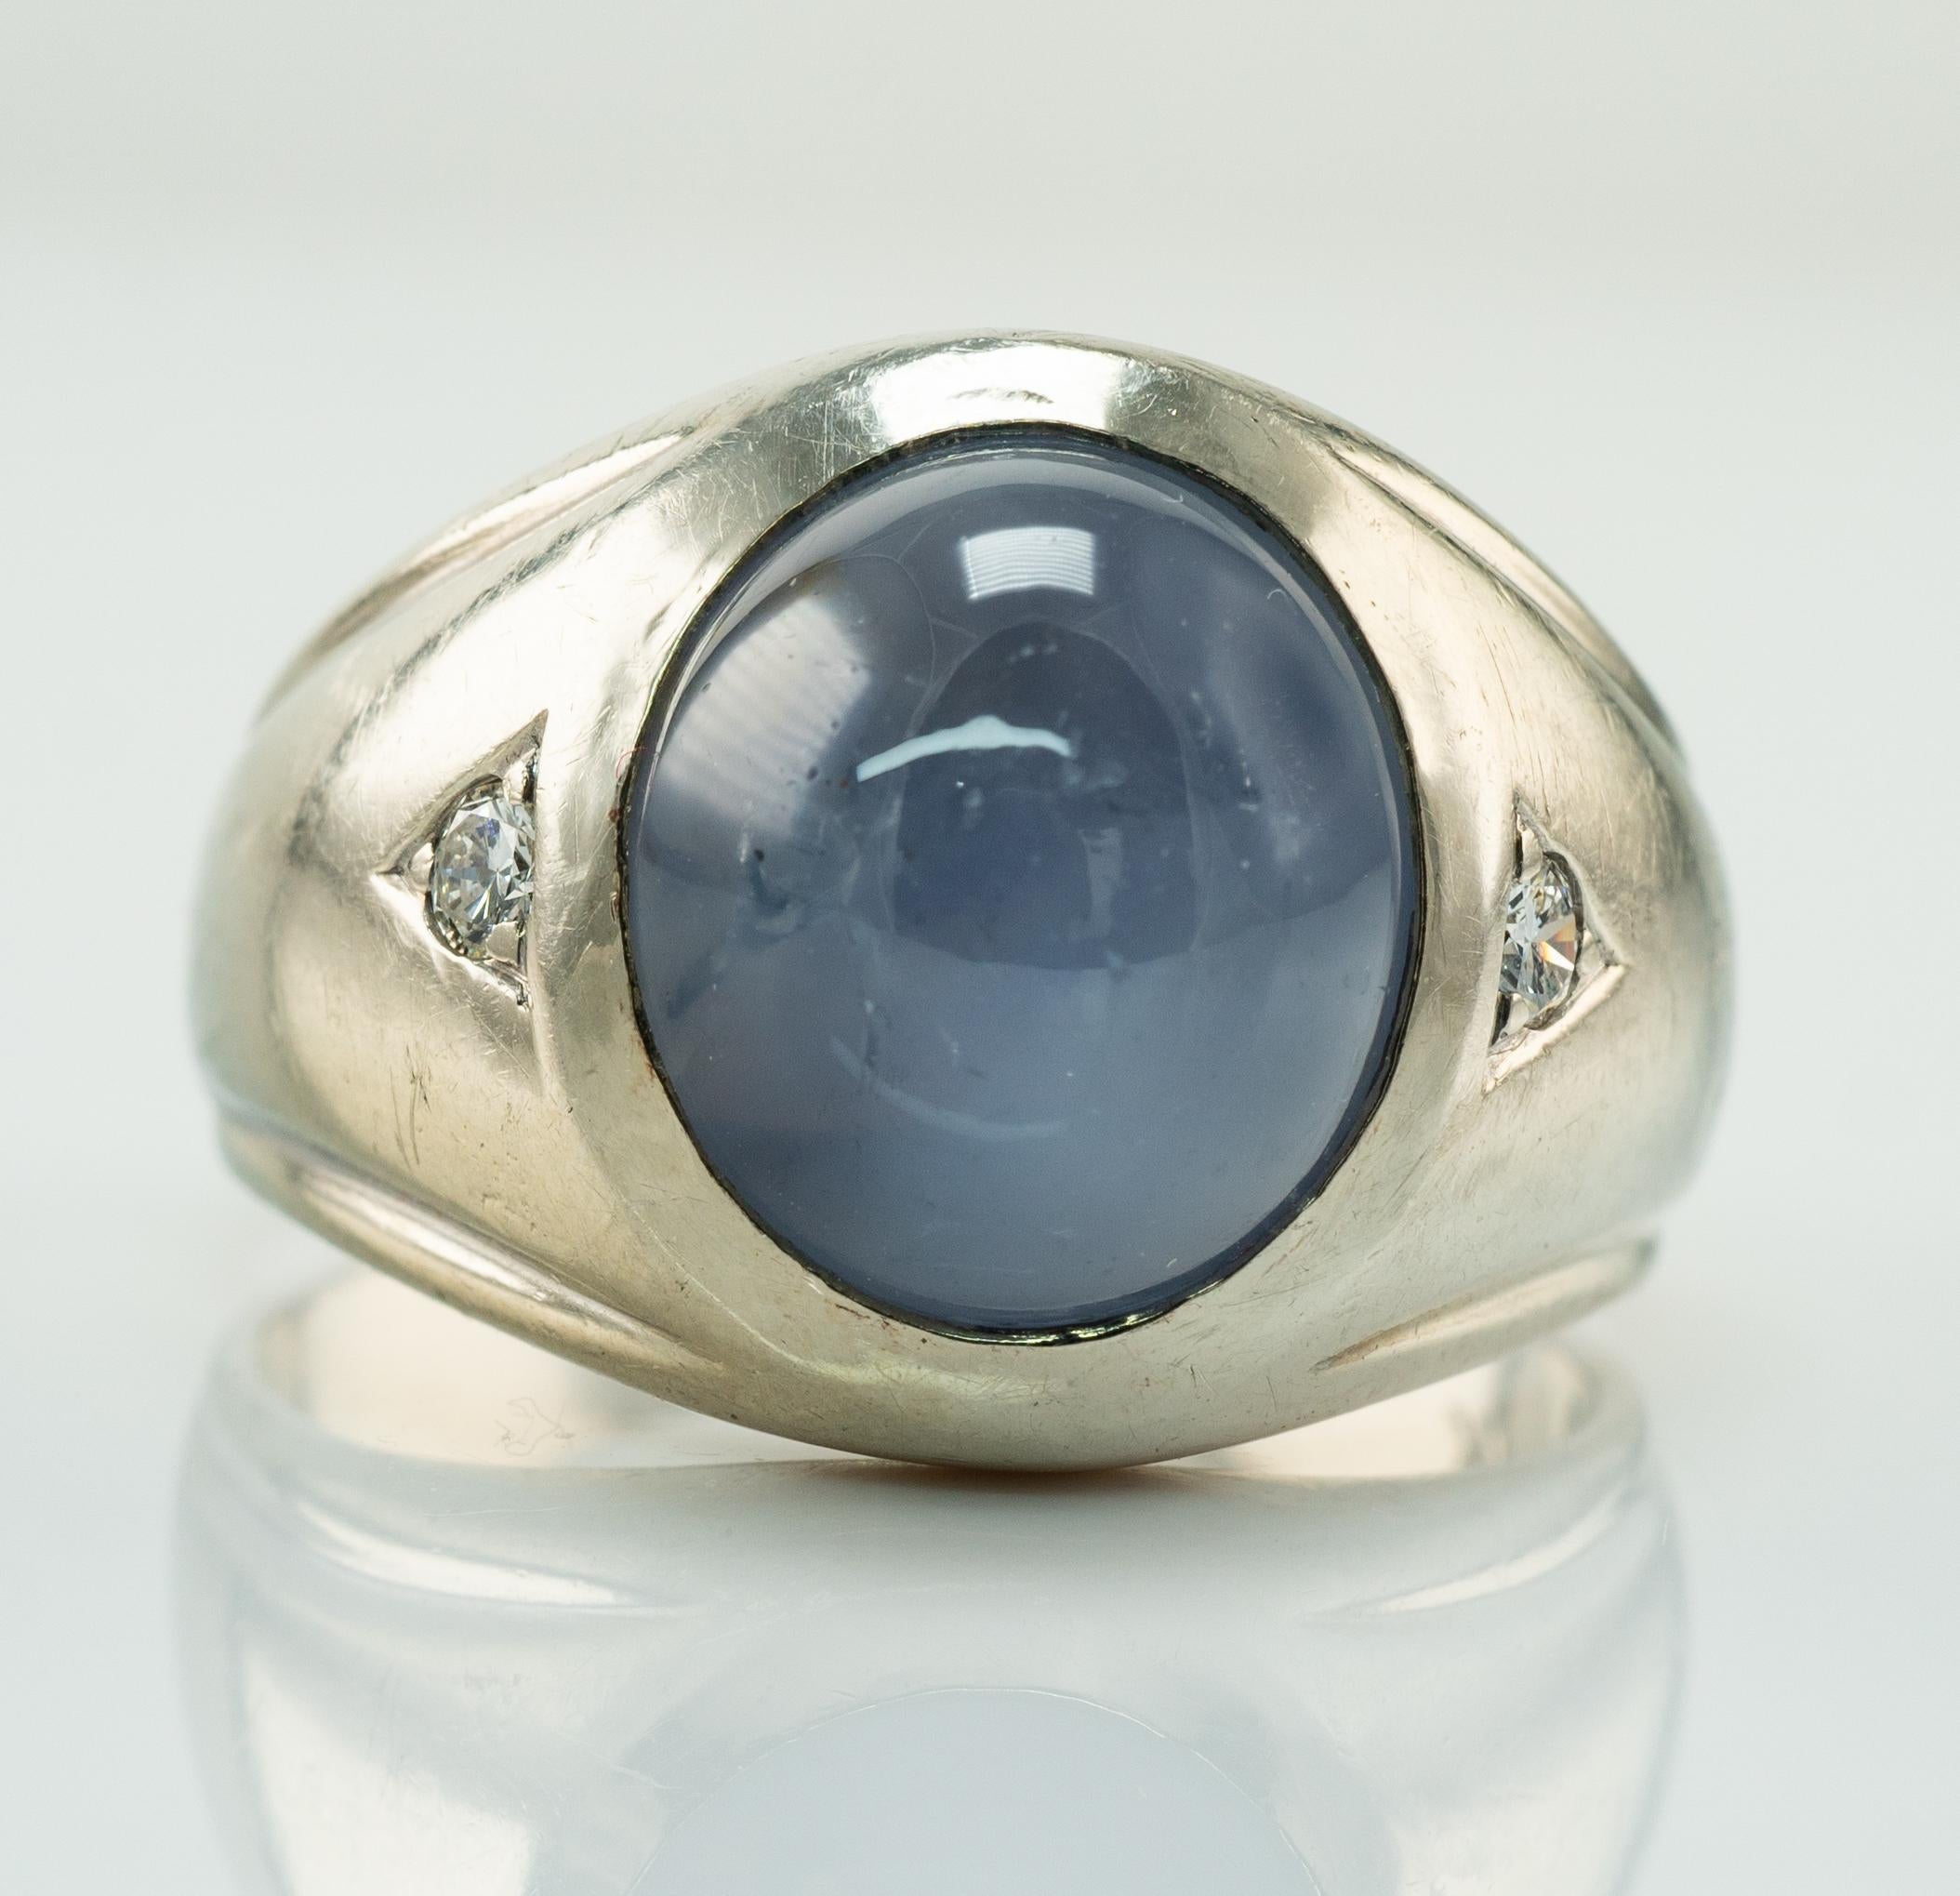 Natural Cabochon Star Sapphire Diamond Ring 14K White Gold

    This vintage ring is crafted in solid 14K White Gold.

    The center natural Earth mined Sapphire cabochon measures 12mm x 10mm (about 6.00 carats).

    The gem has minor signs of